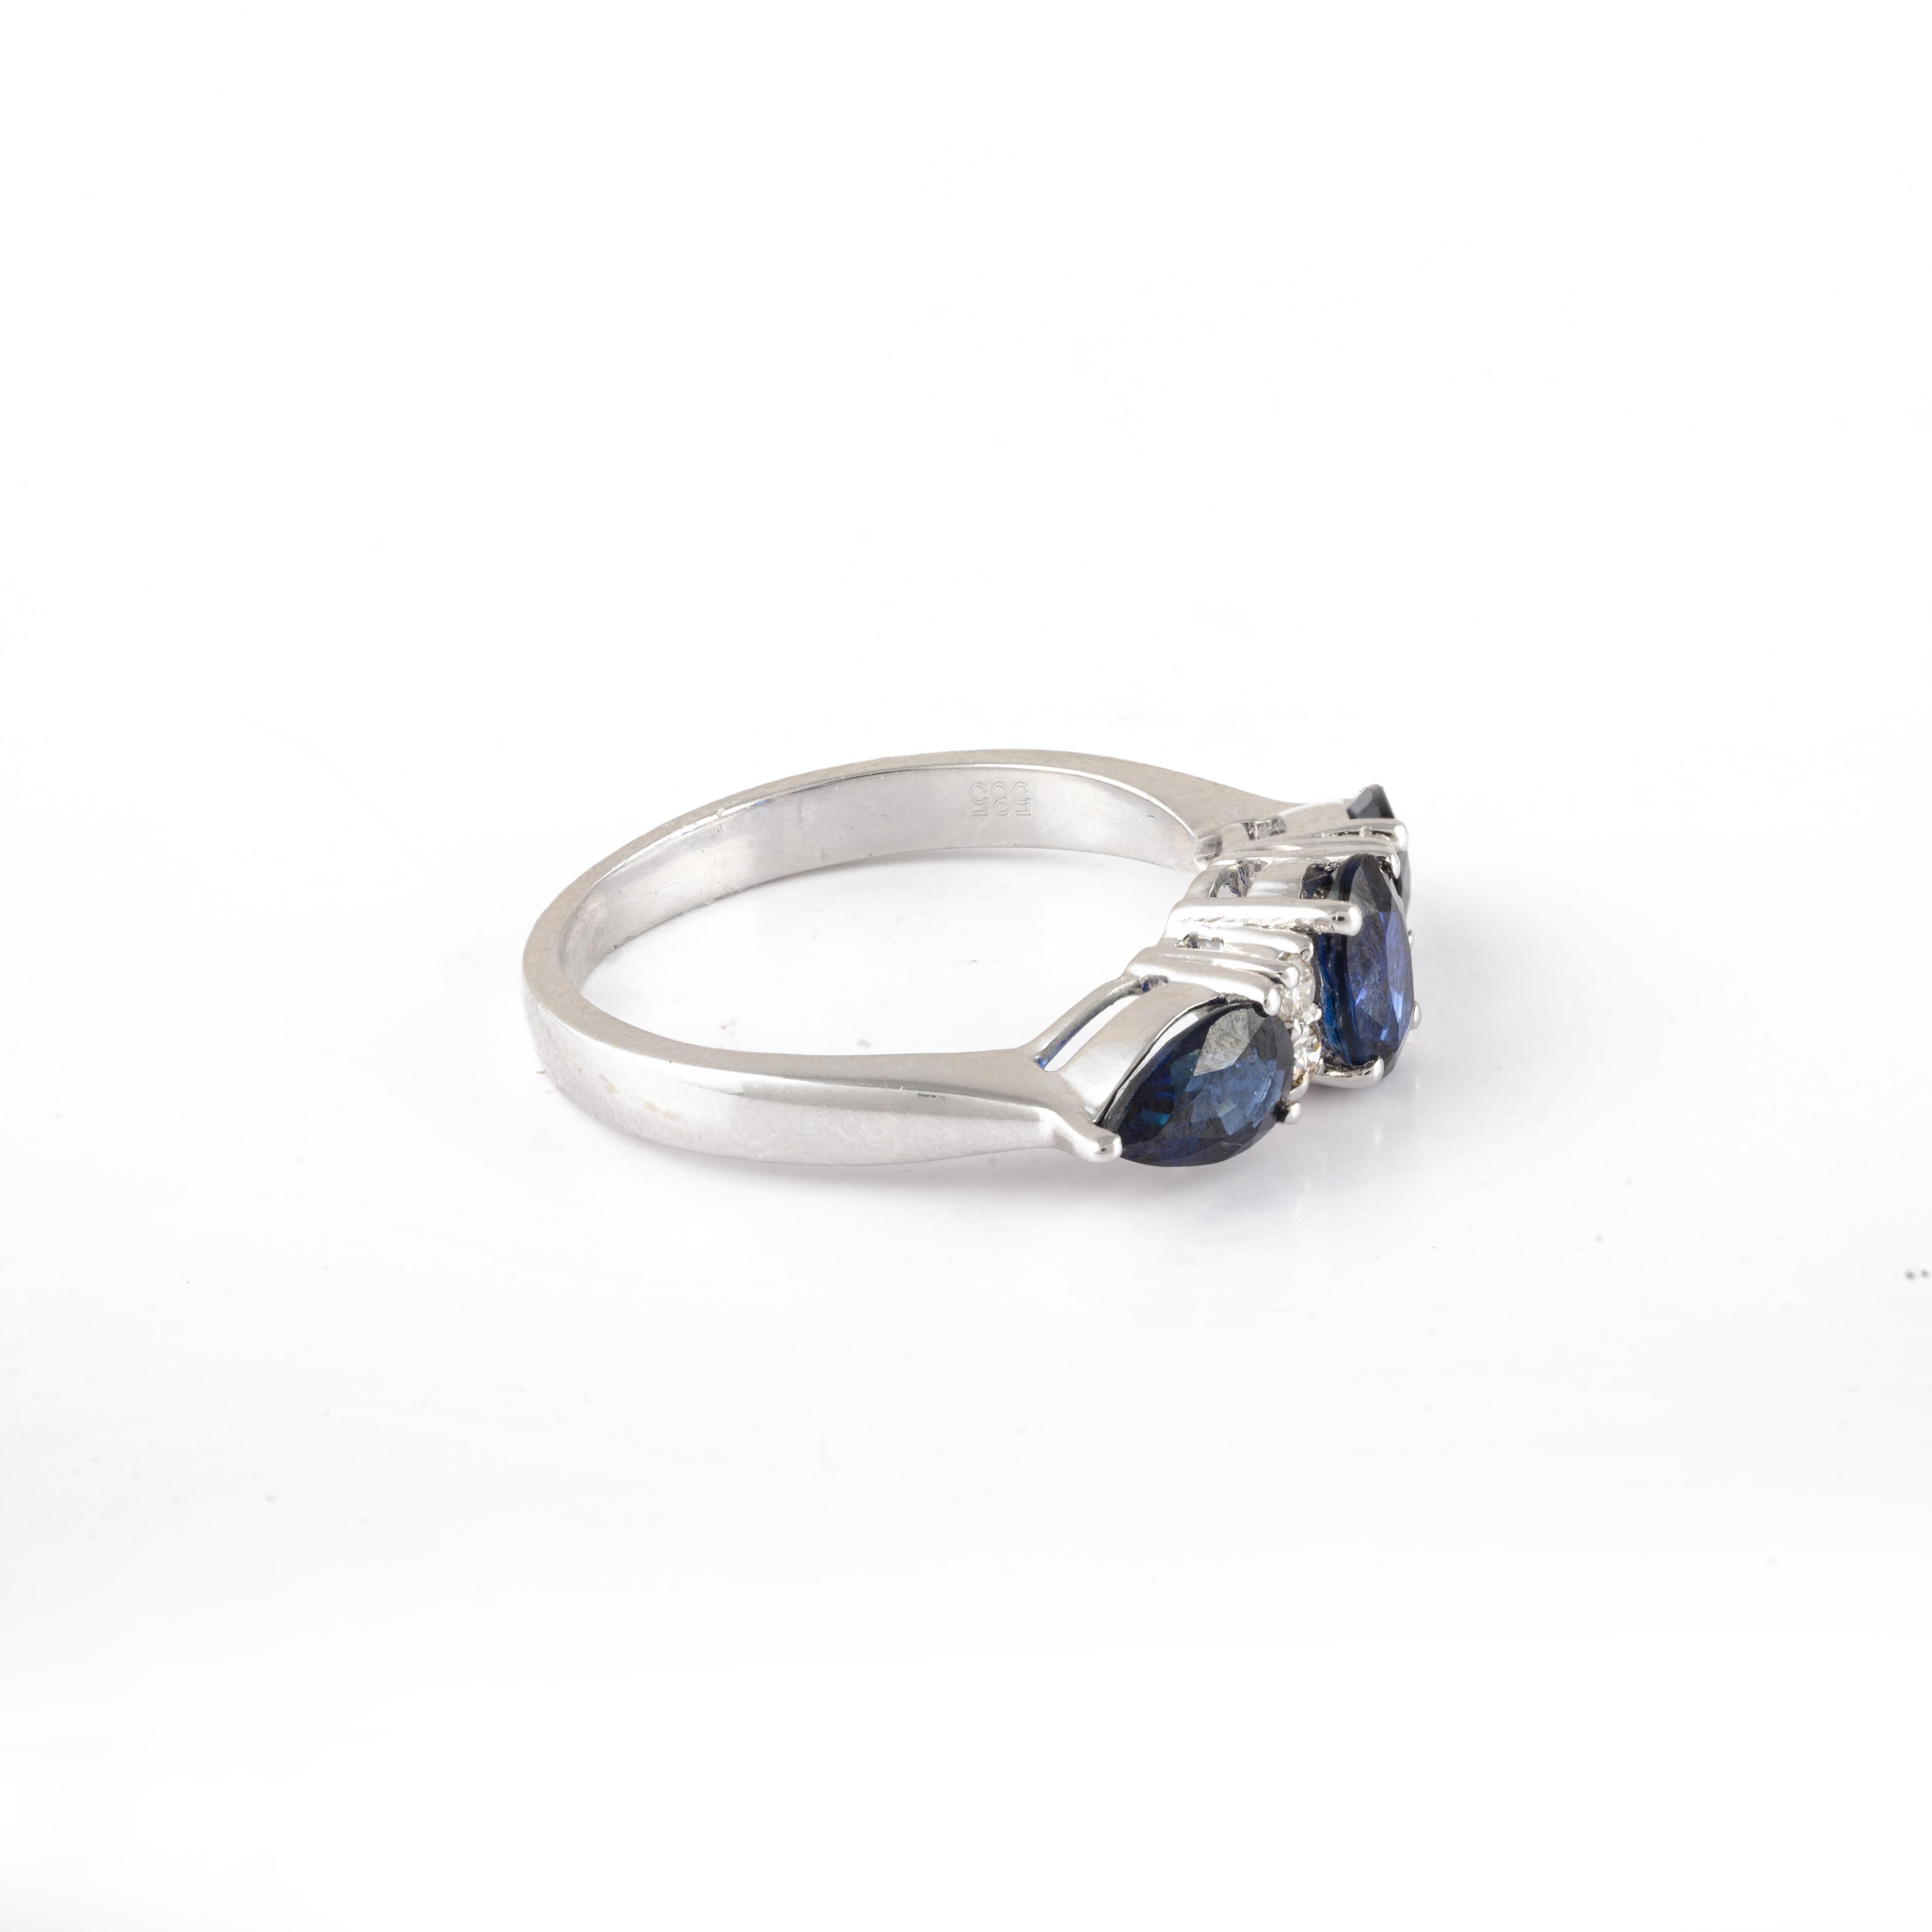 For Sale:  Gorgeous Sapphire Diamond Engagement Ring in 14k Solid White Gold For Her 4